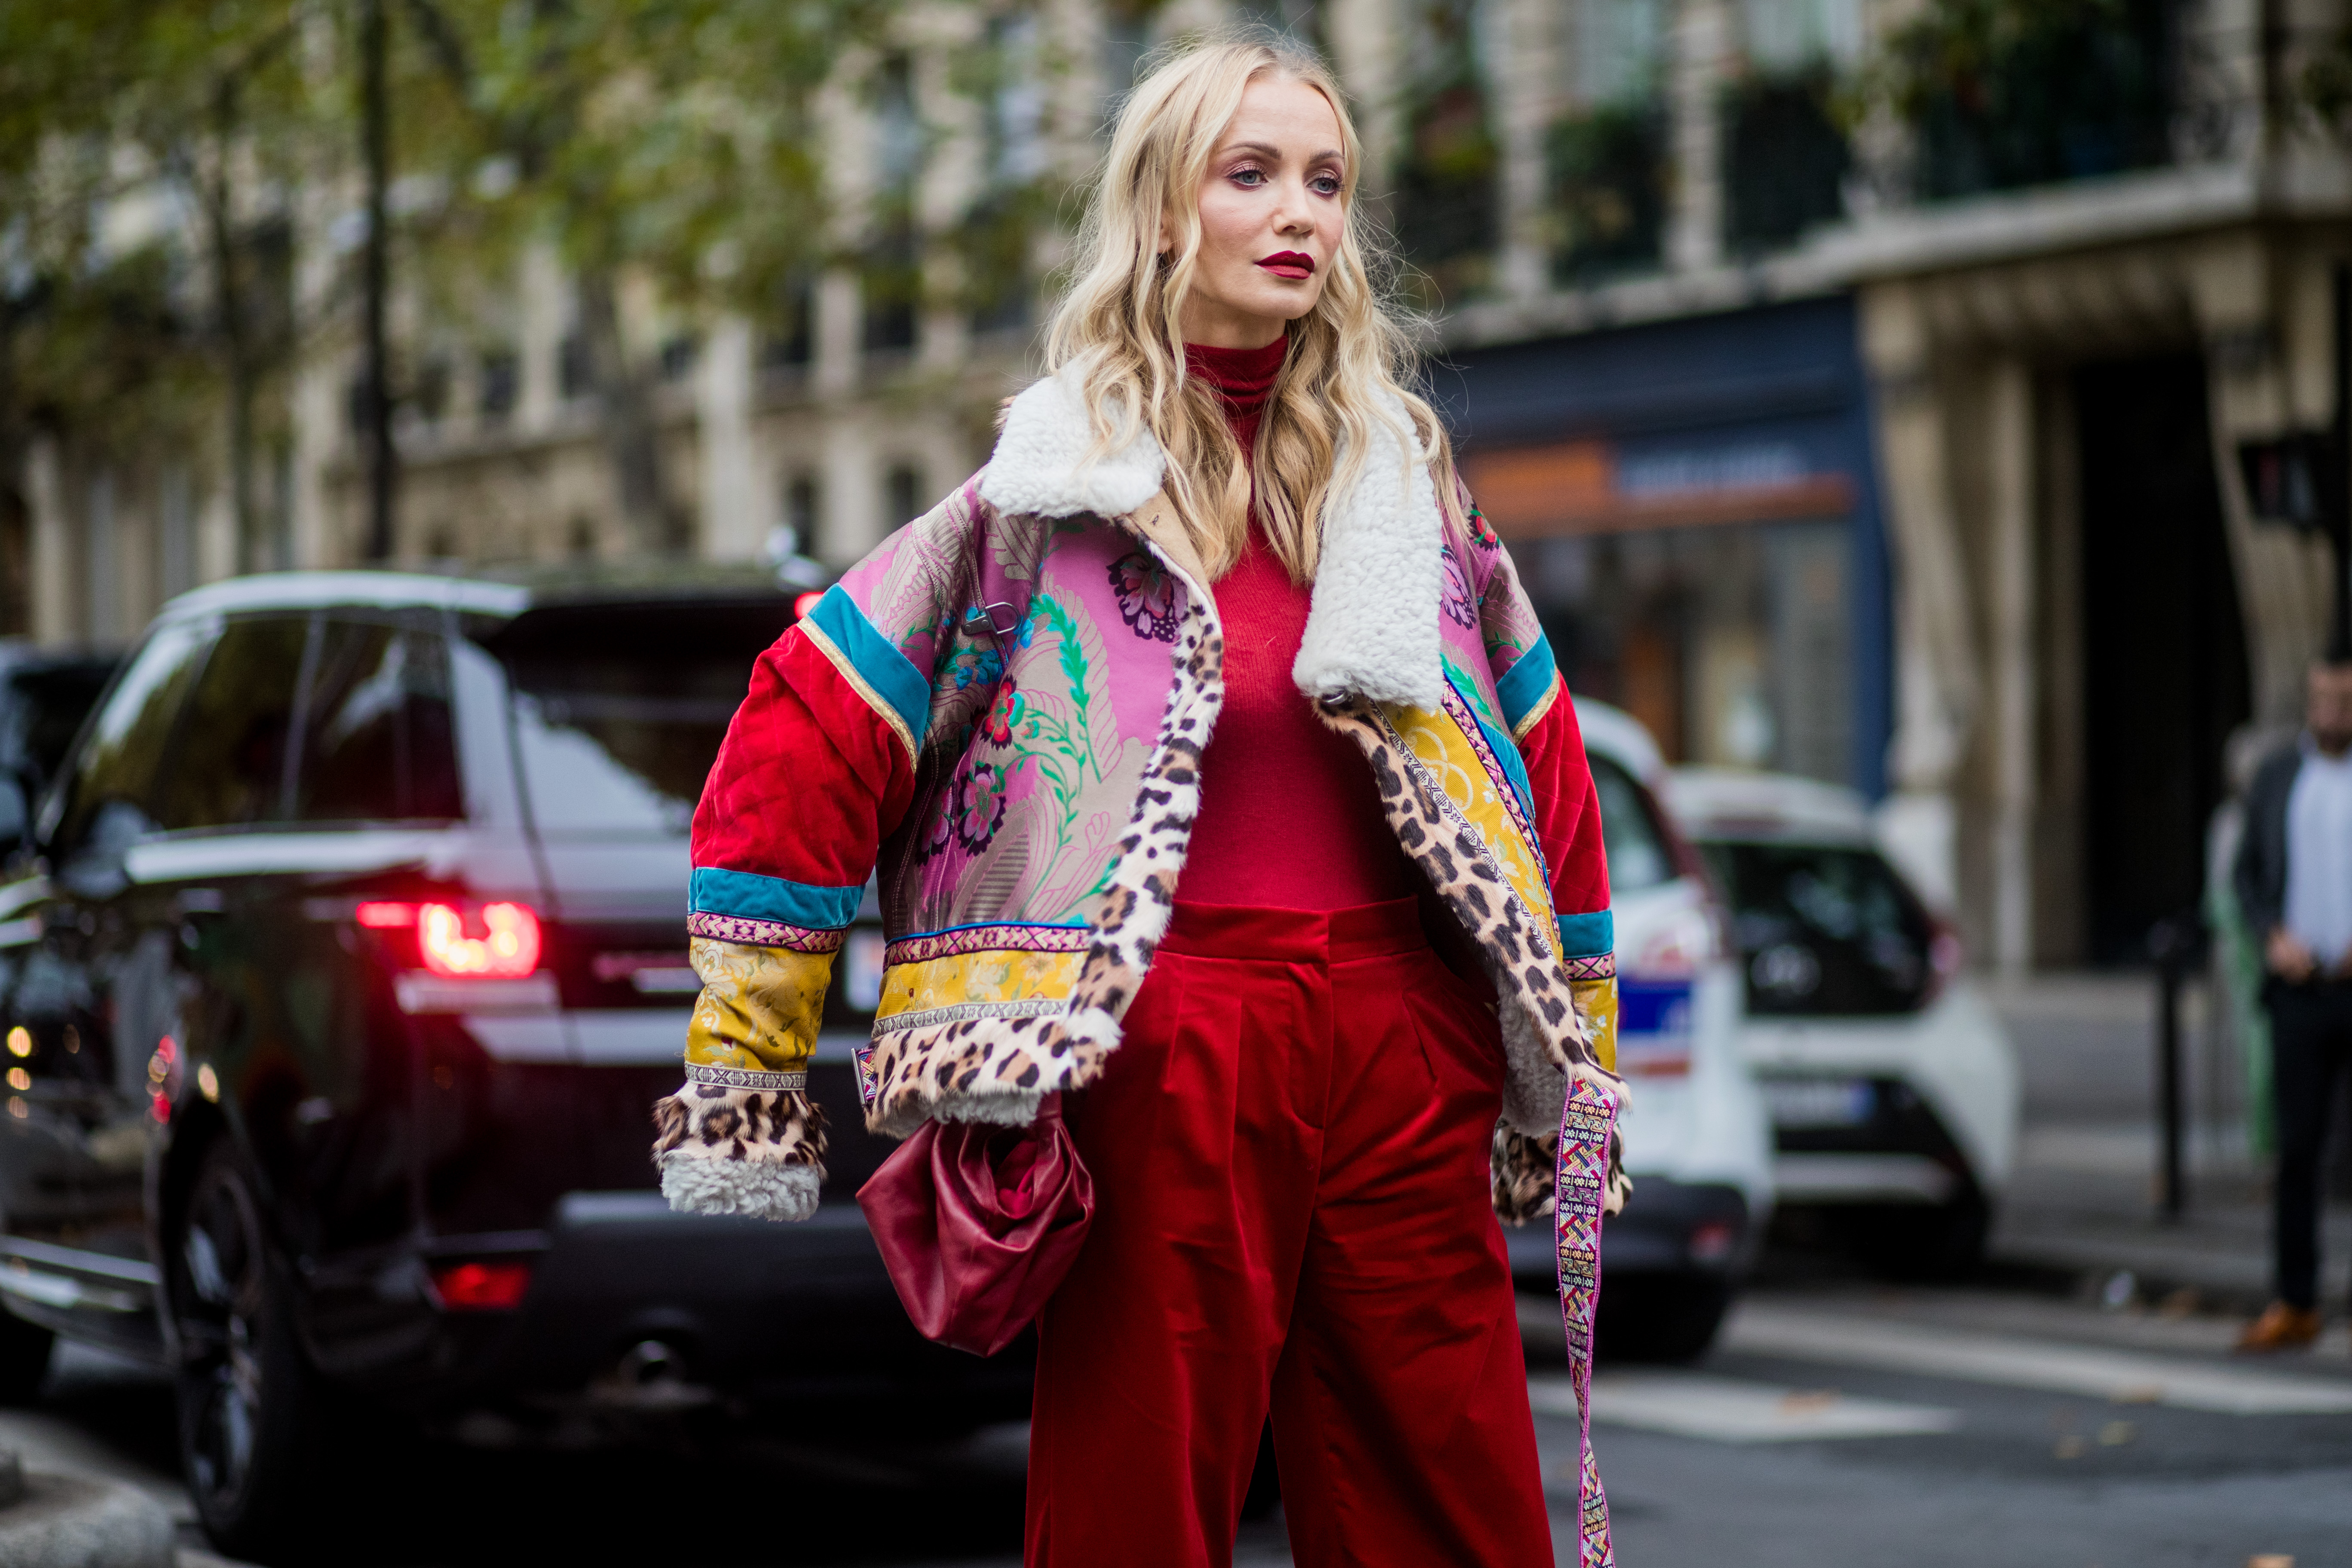 PARIS, FRANCE - OCTOBER 01: A guest seen outside Valentino during Paris Fashion Week Spring/Summer 2018 on October 1, 2017 in Paris, France. (Photo by Christian Vierig/Getty Images)